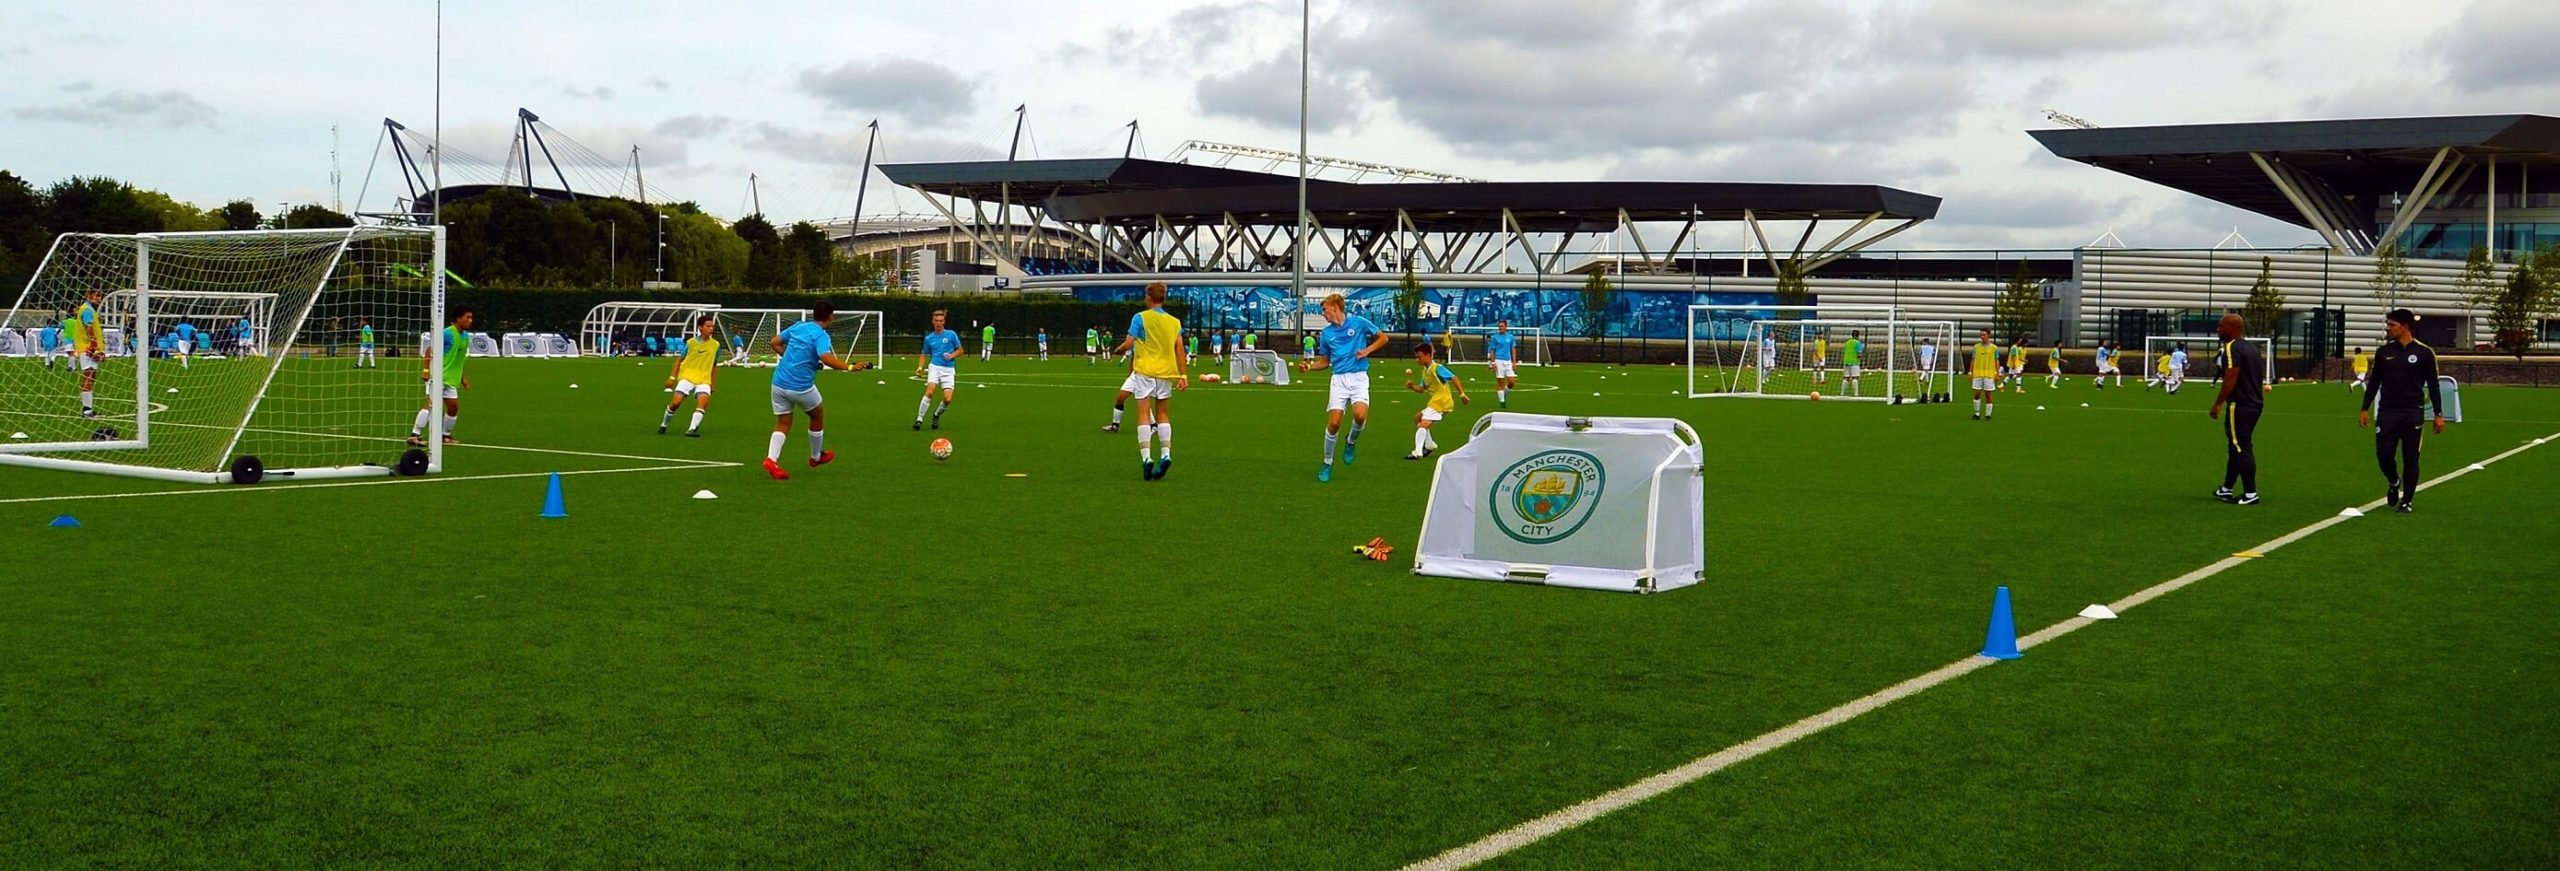 21 Europe International Soccer Academy Training Experience During The Summer